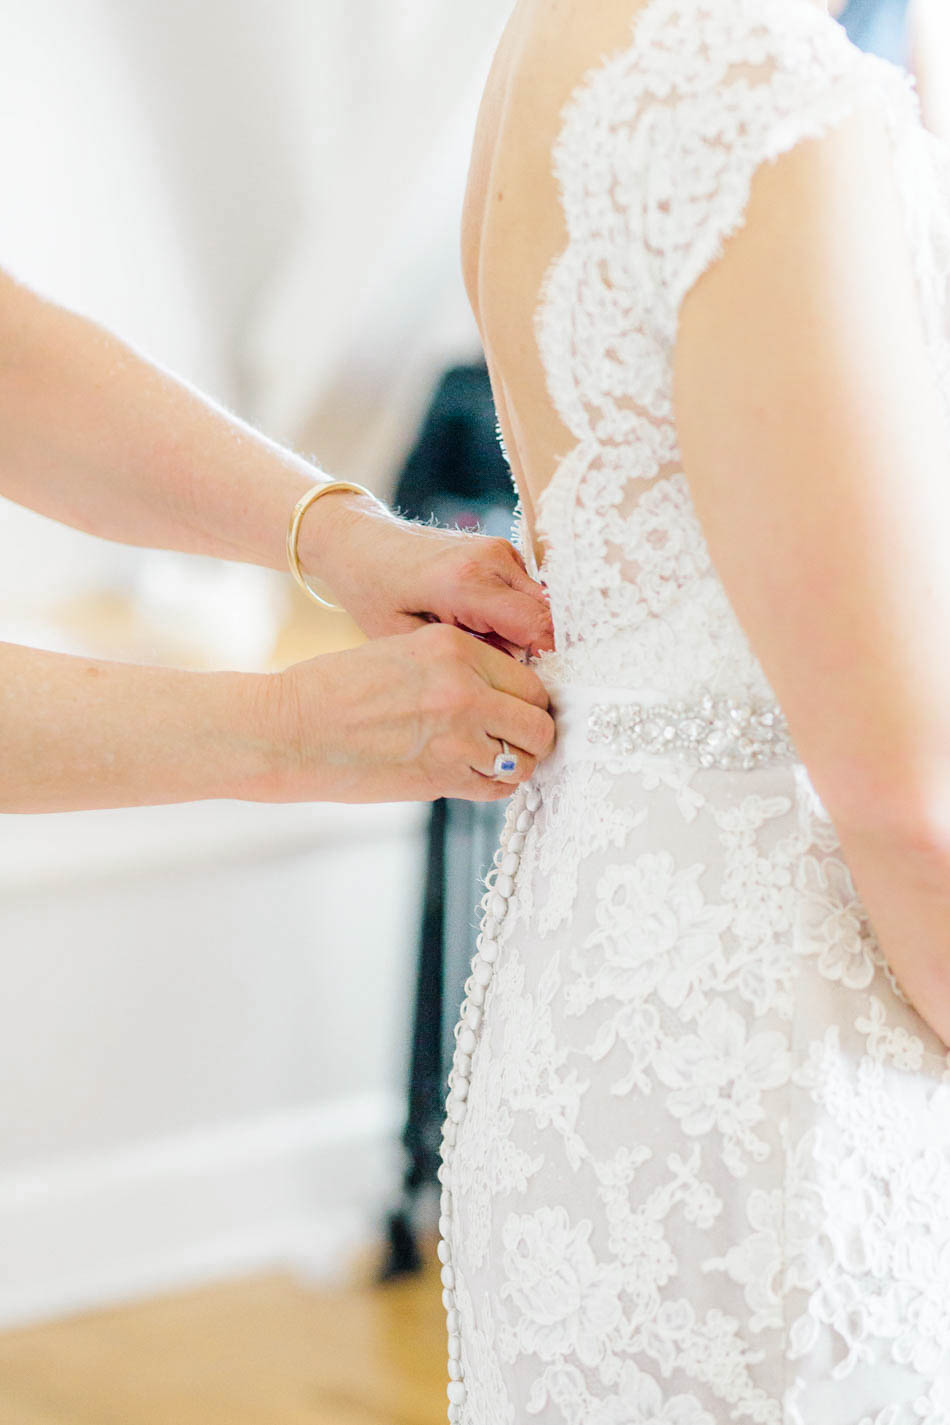 Bride gets into dress, Alhambra Hall, Mt Pleasant, South Carolina Kate Timbers Photography. http://katetimbers.com #katetimbersphotography // Charleston Photography // Inspiration